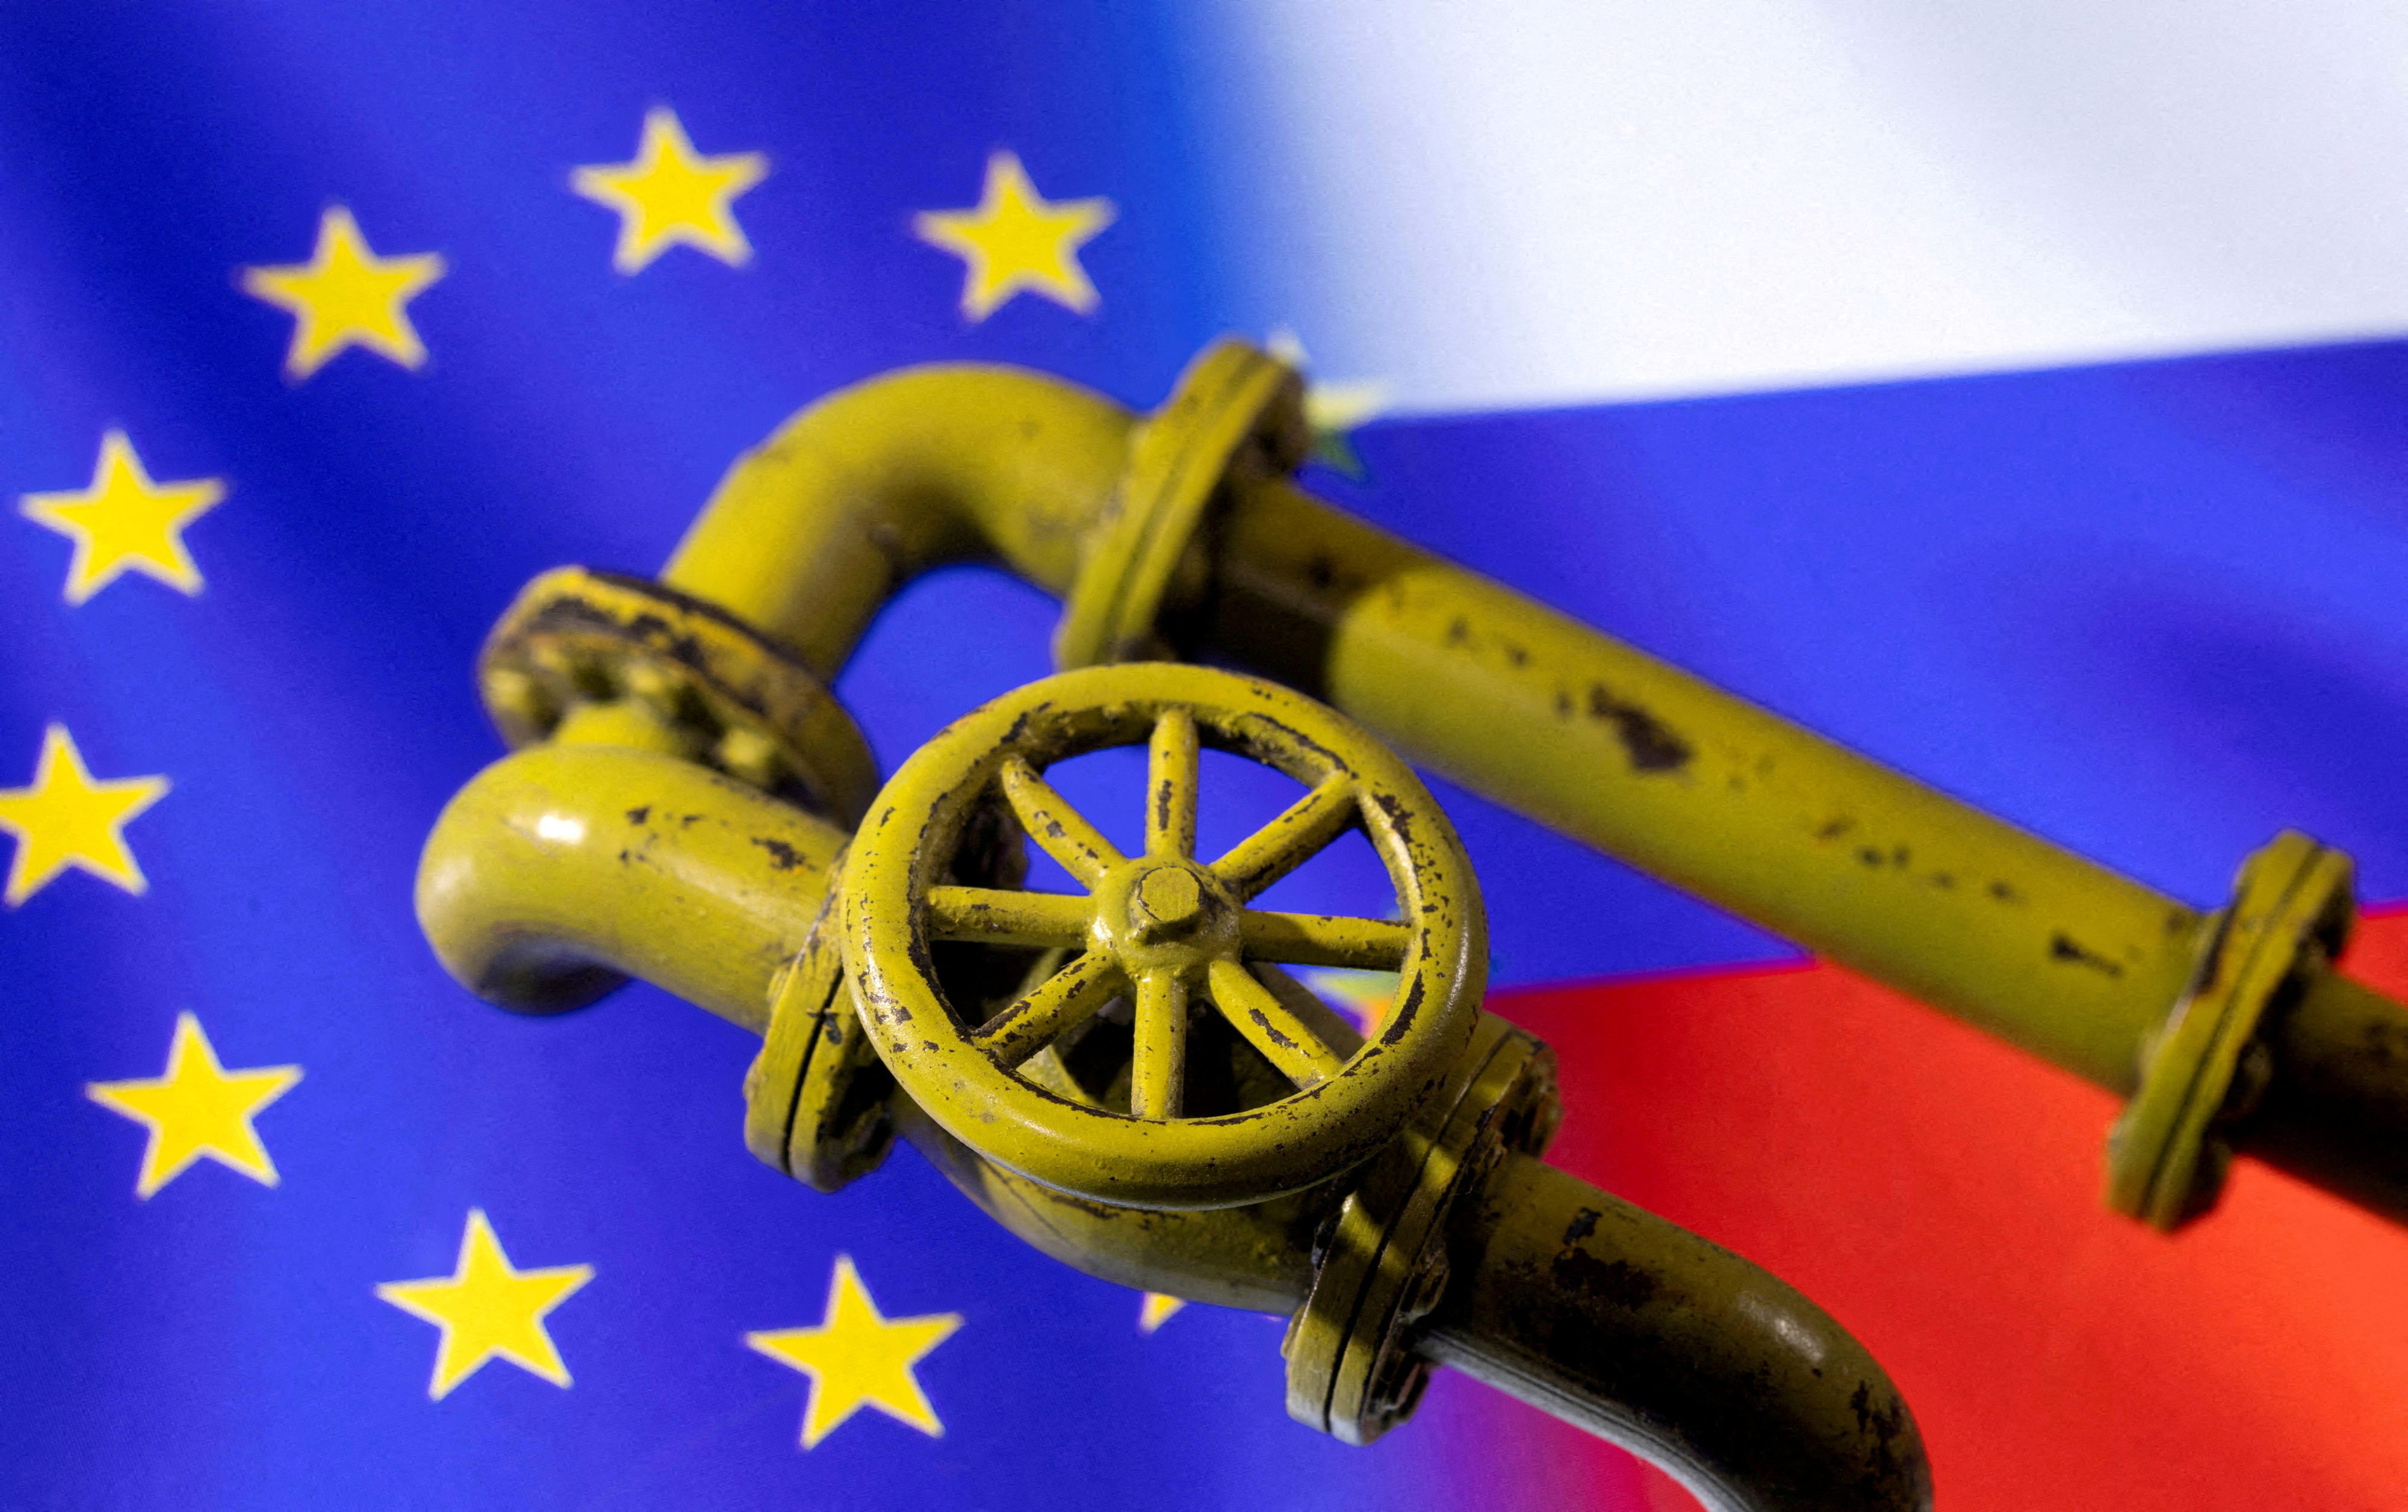 llustration shows Natural Gas Pipes and EU and Russian flags